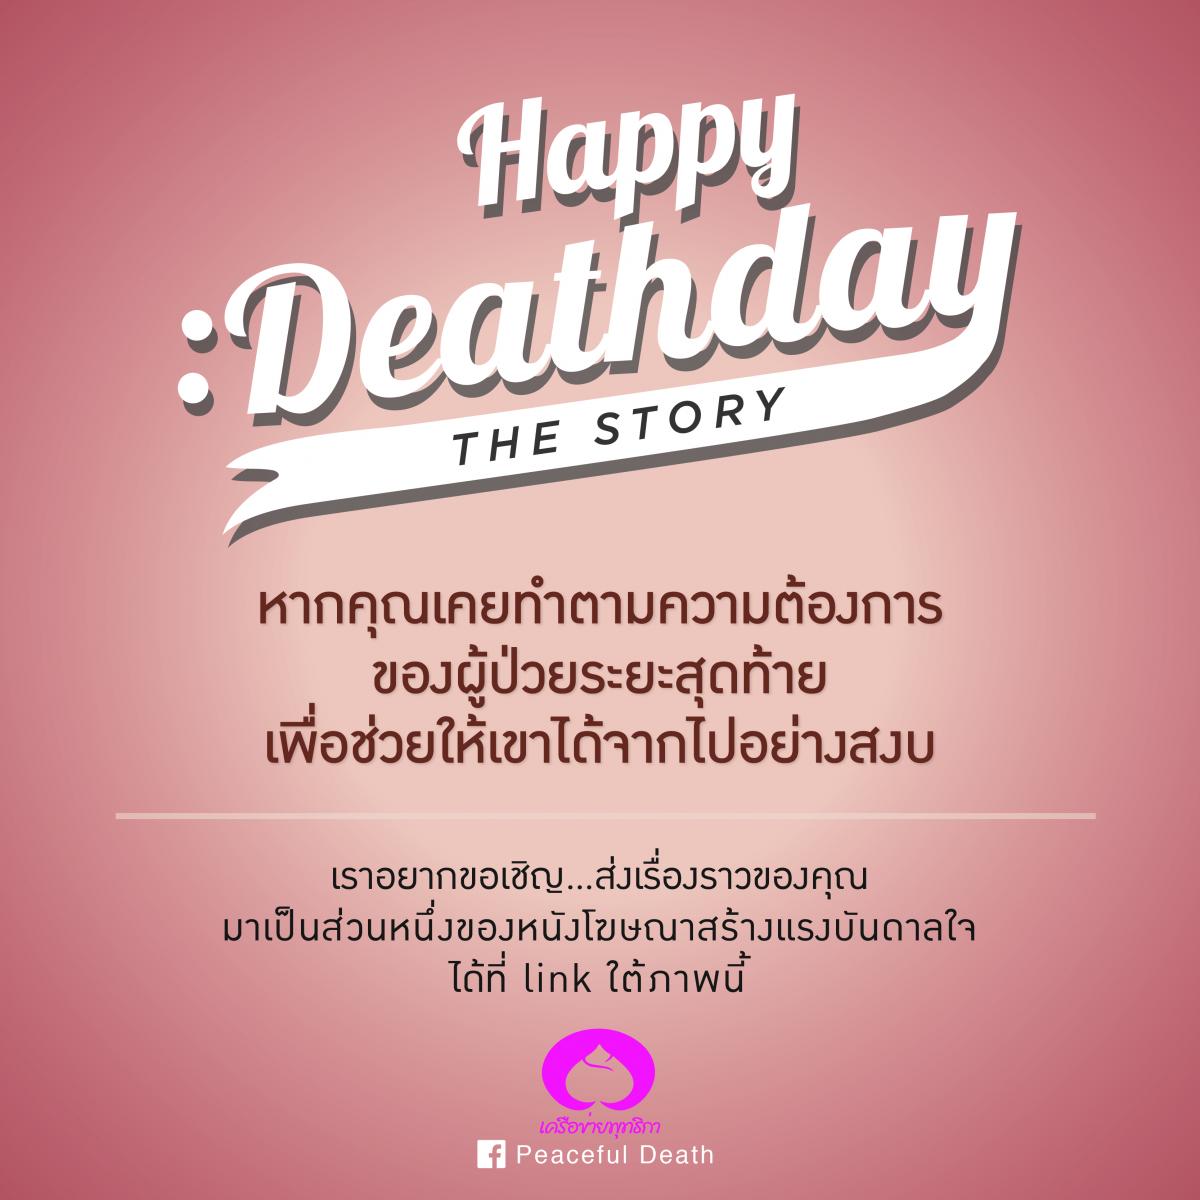 Happy Death Day The Story